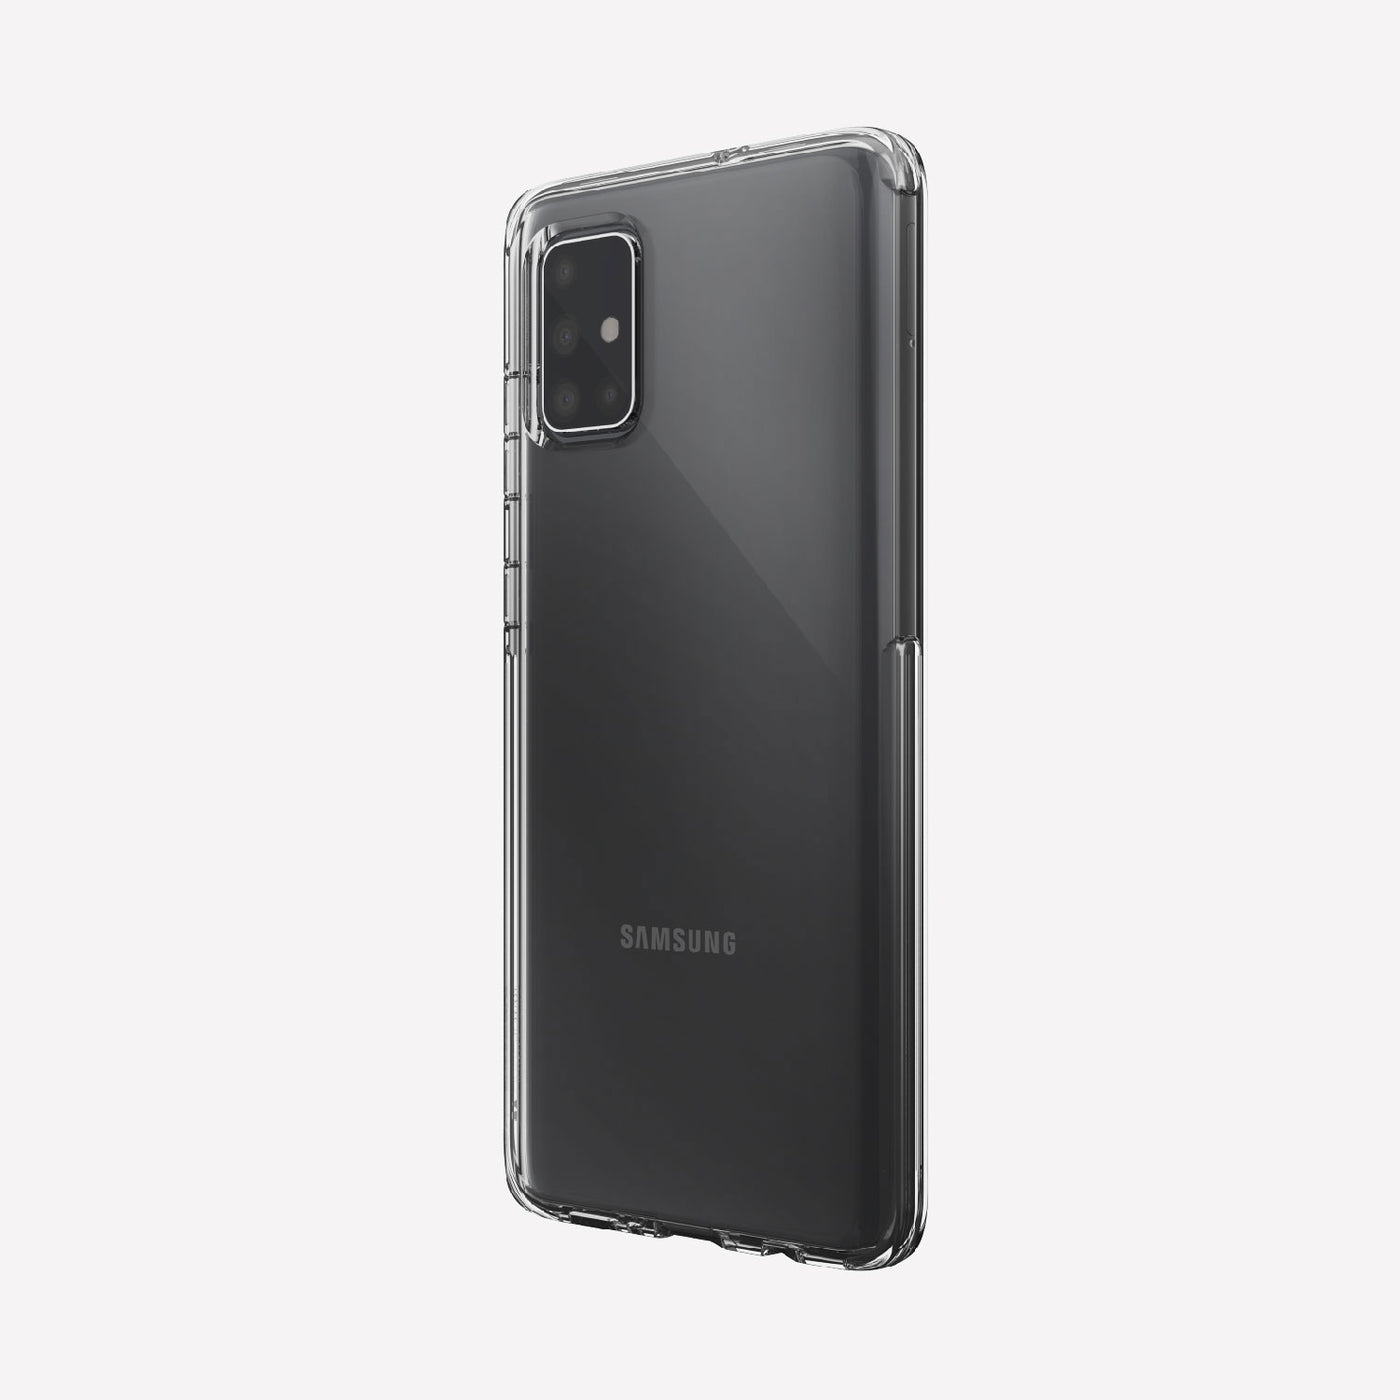 Thin Case for Samsung Galaxy A71. Raptic Clear in clear.